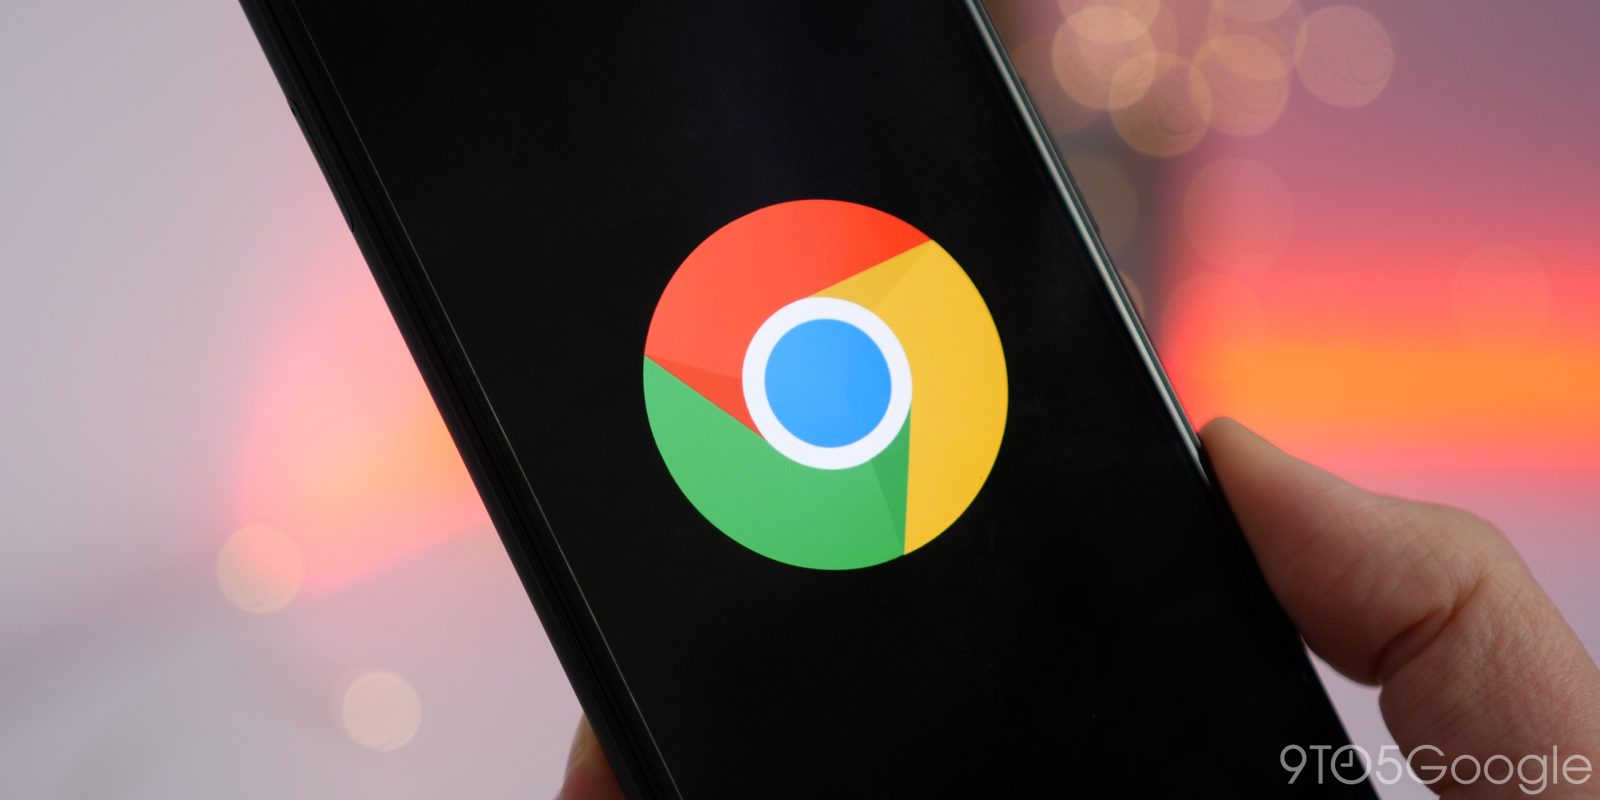 Chrome Android reminder notifications